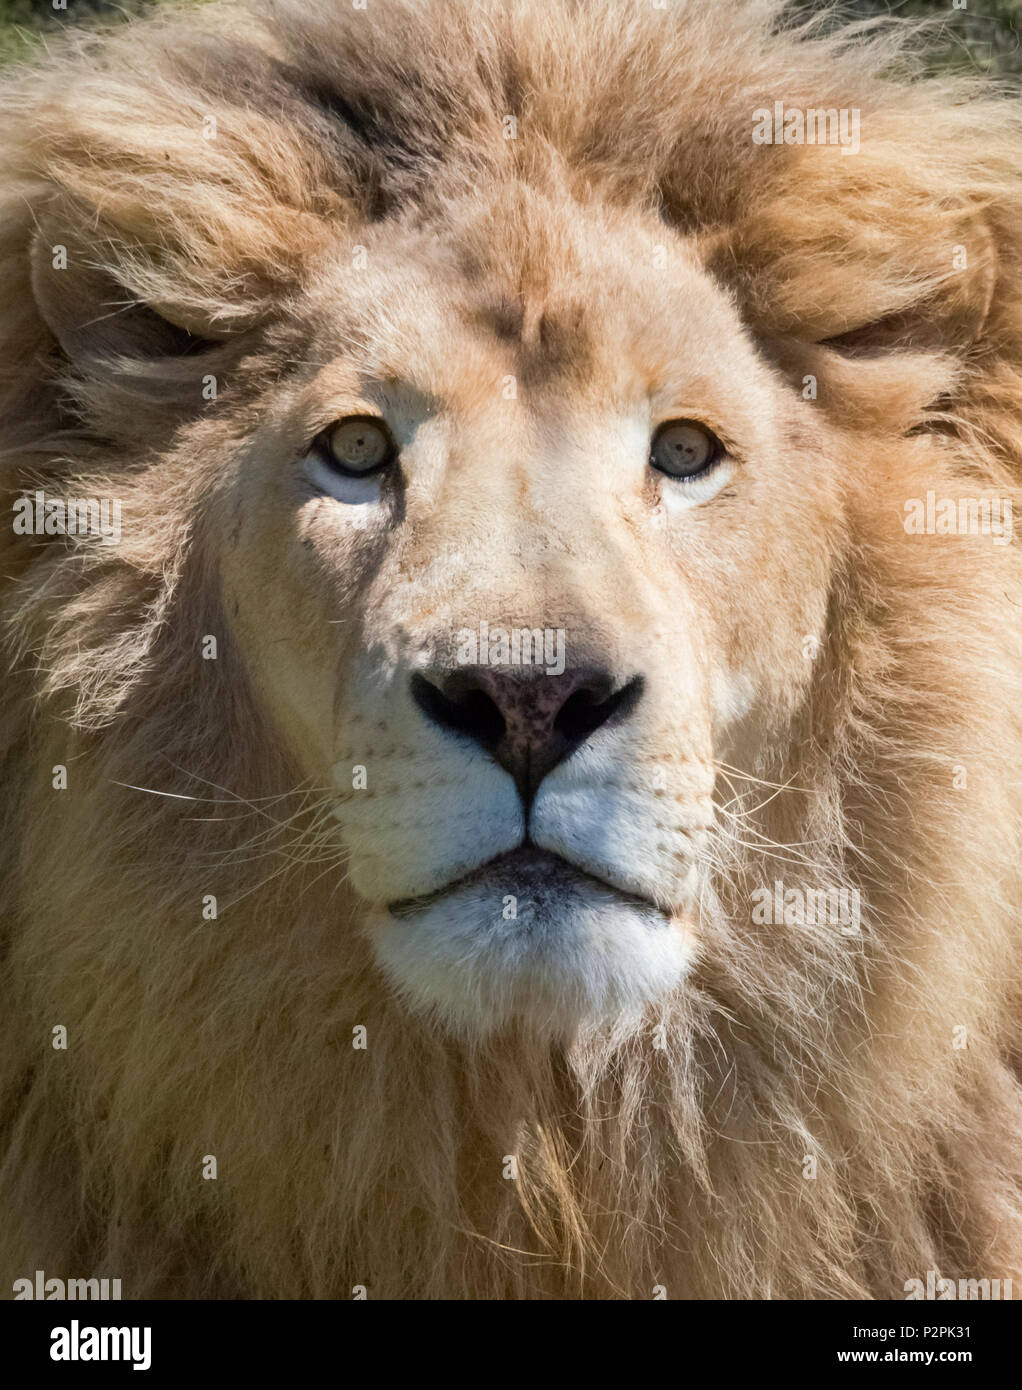 Lion, Western Cape Province, South Africa Stock Photo